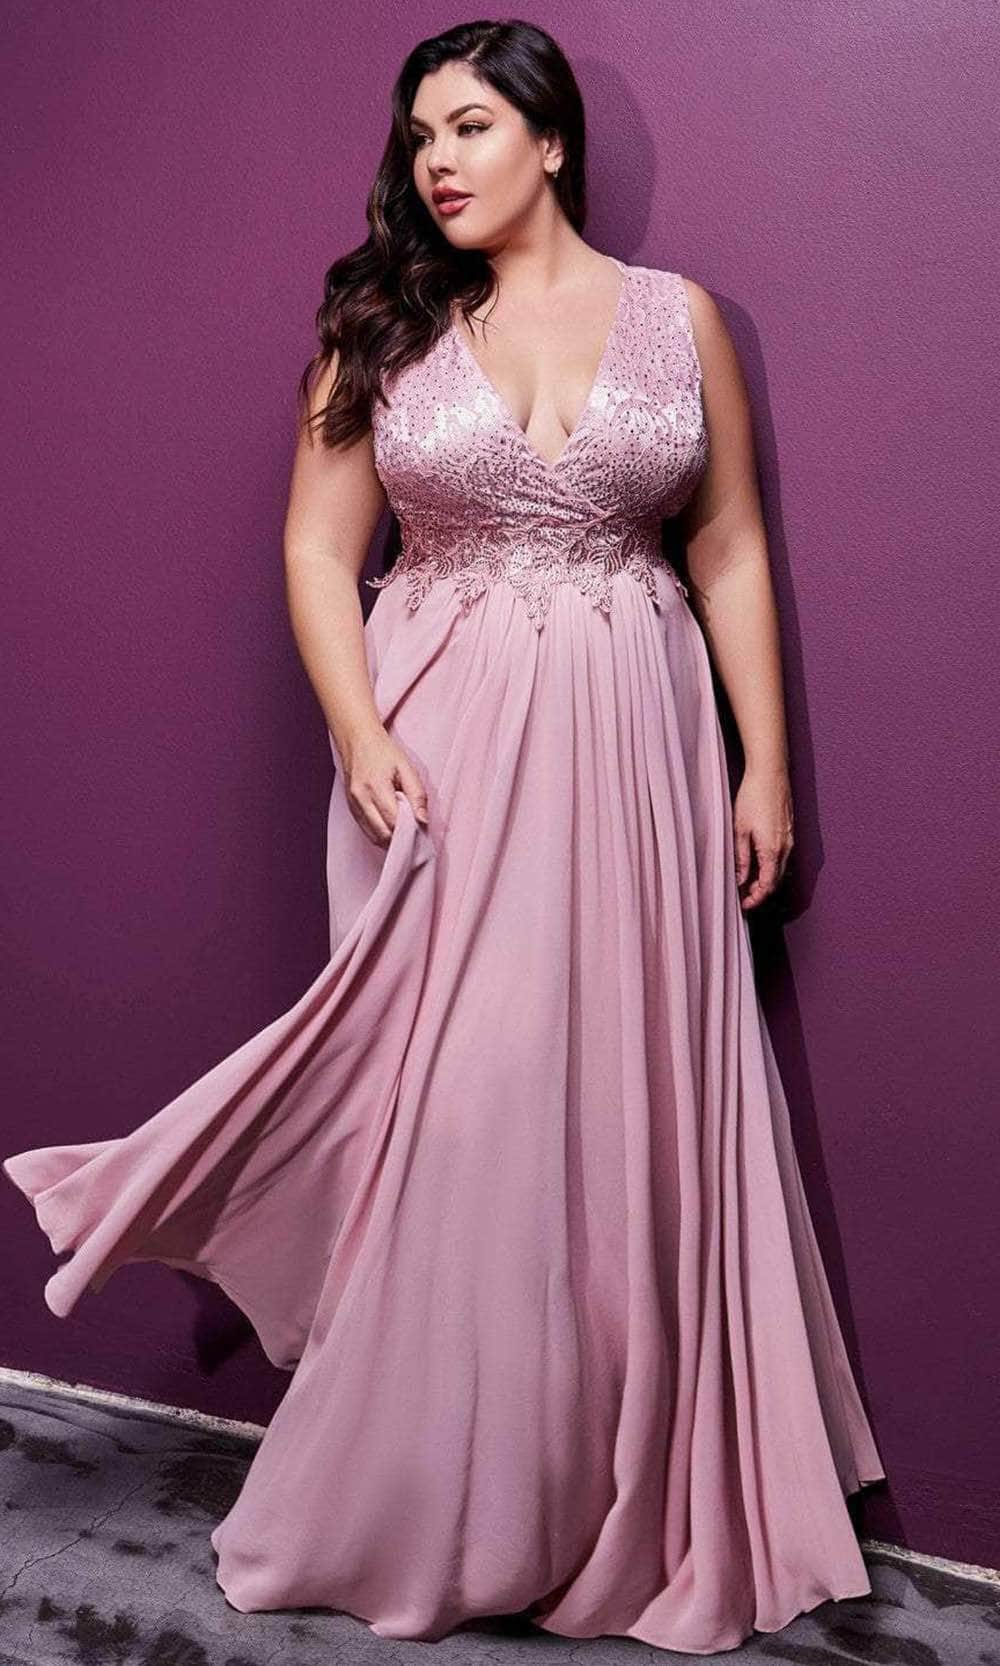 Cinderella Divine S7201 - Sleeveless A-Line Long Dress Special Occasion Dress 16 / Dusty Rose